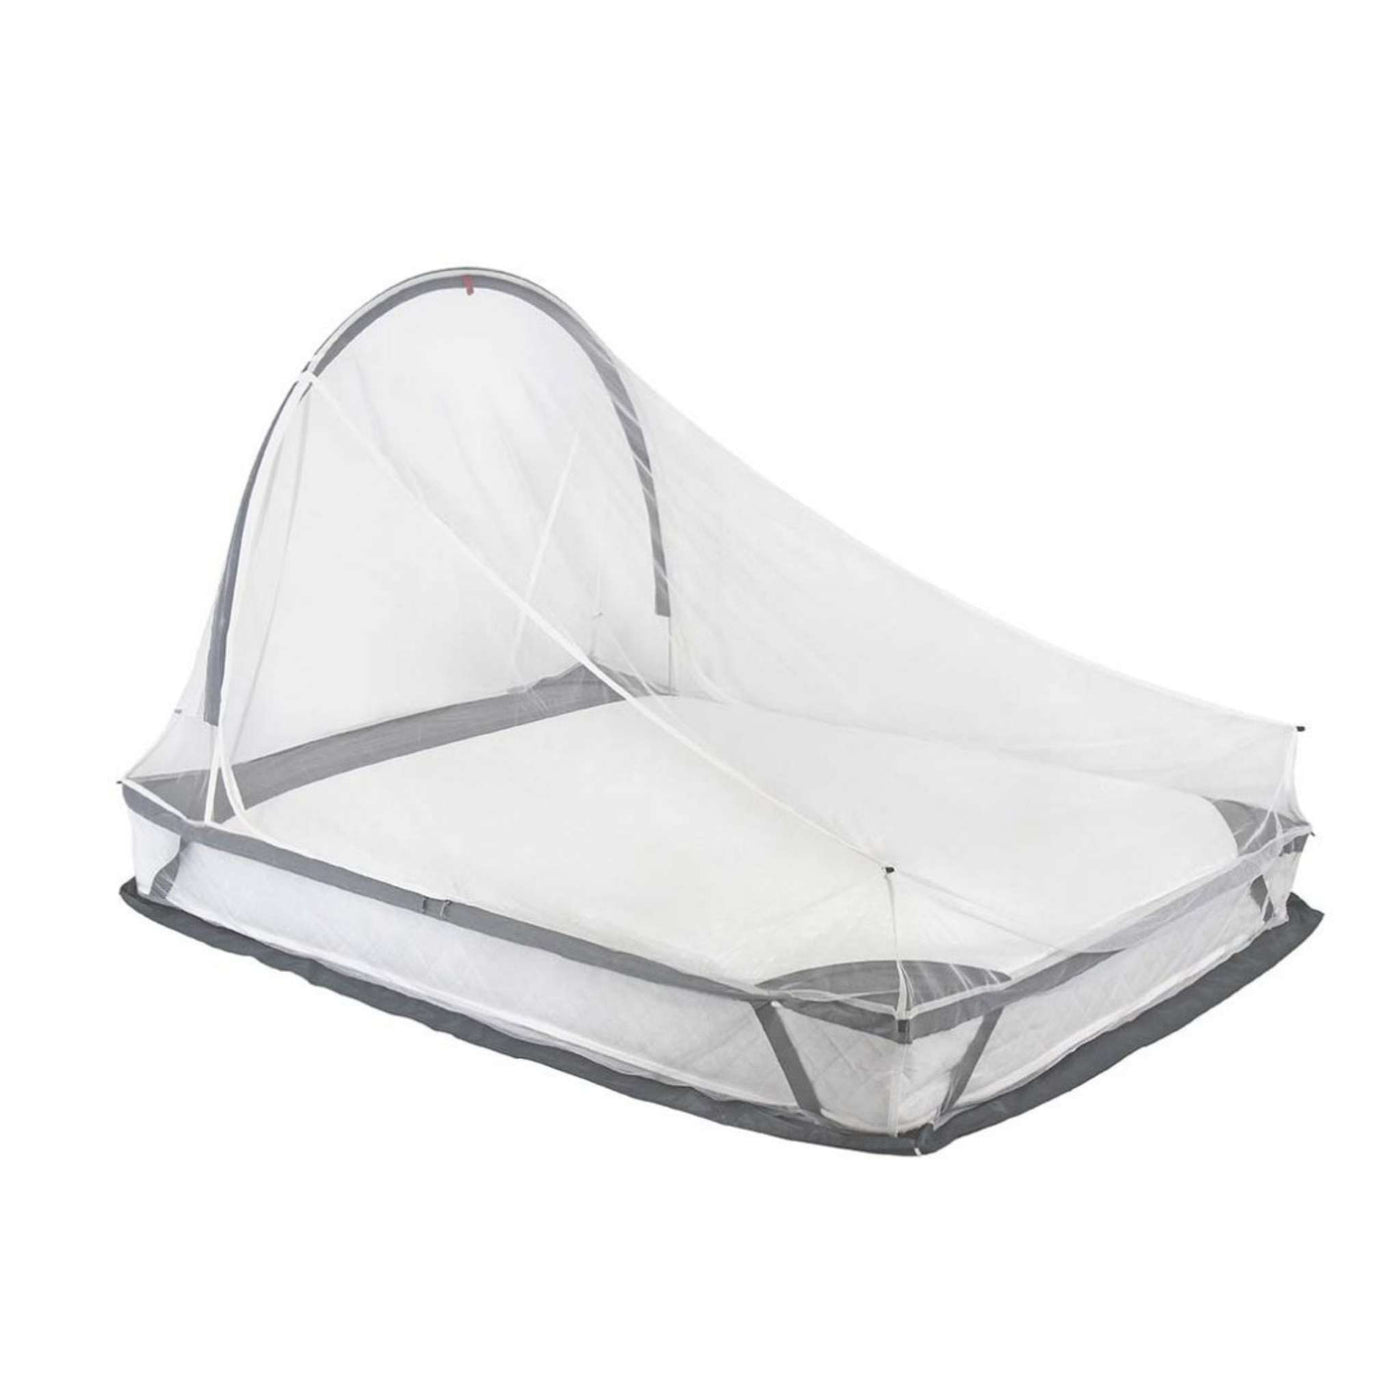 Lifesystems Arc Self-Supporting Double Mosquito Net | Mosquito Nets NZ | Further Faster Christchurch NZ